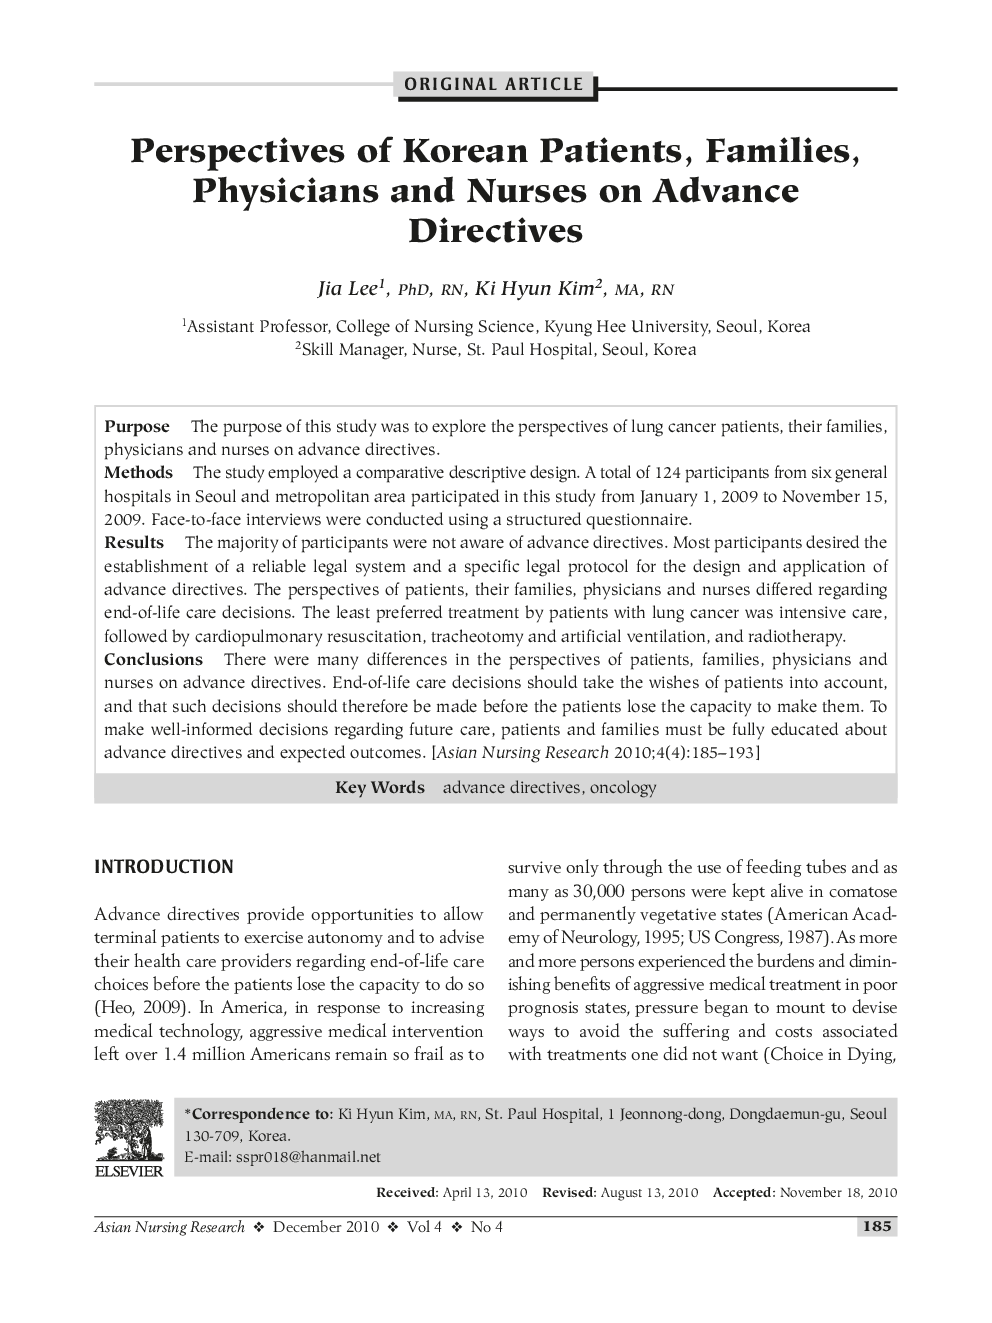 Perspectives of Korean Patients, Families, Physicians and Nurses on Advance Directives